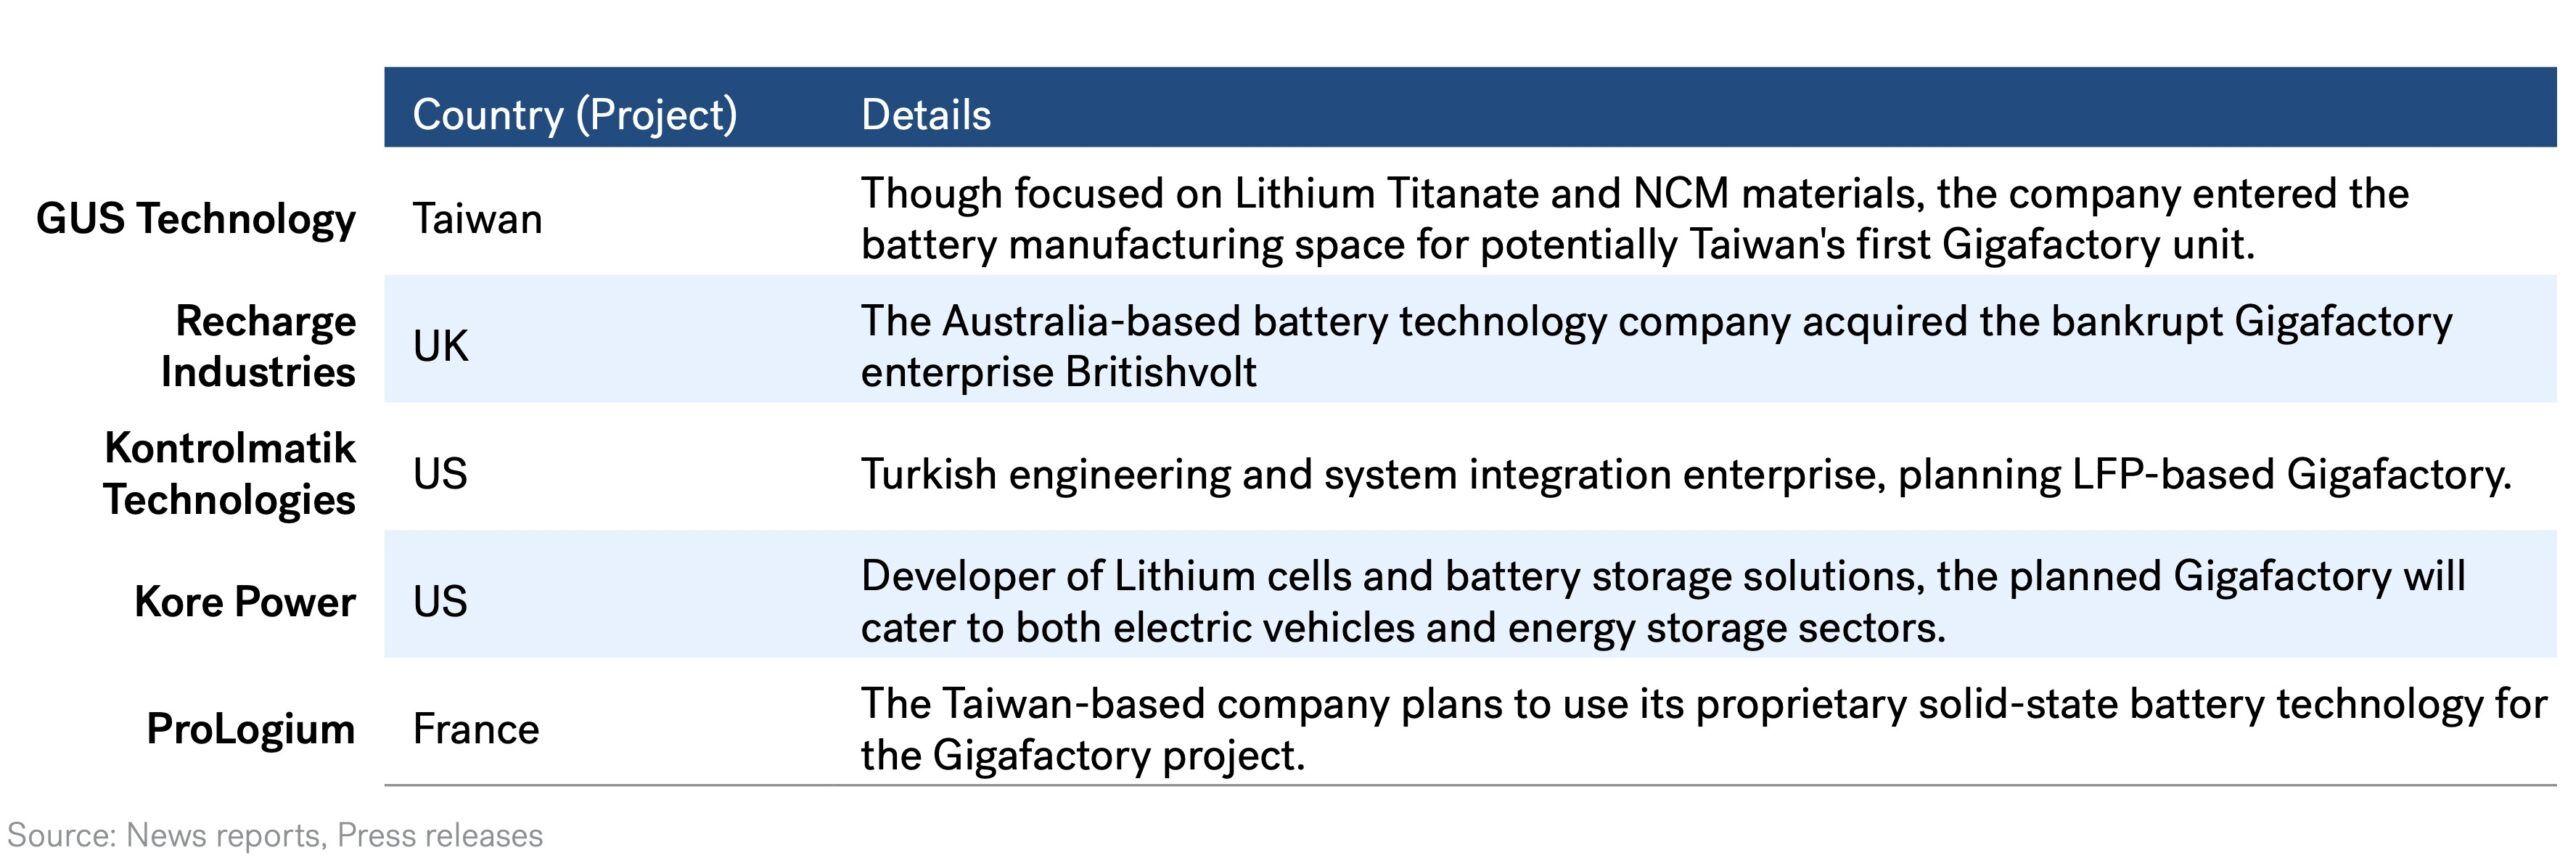 Technology Providers Setting up Battery Manufacturing Capacities (illustrative)